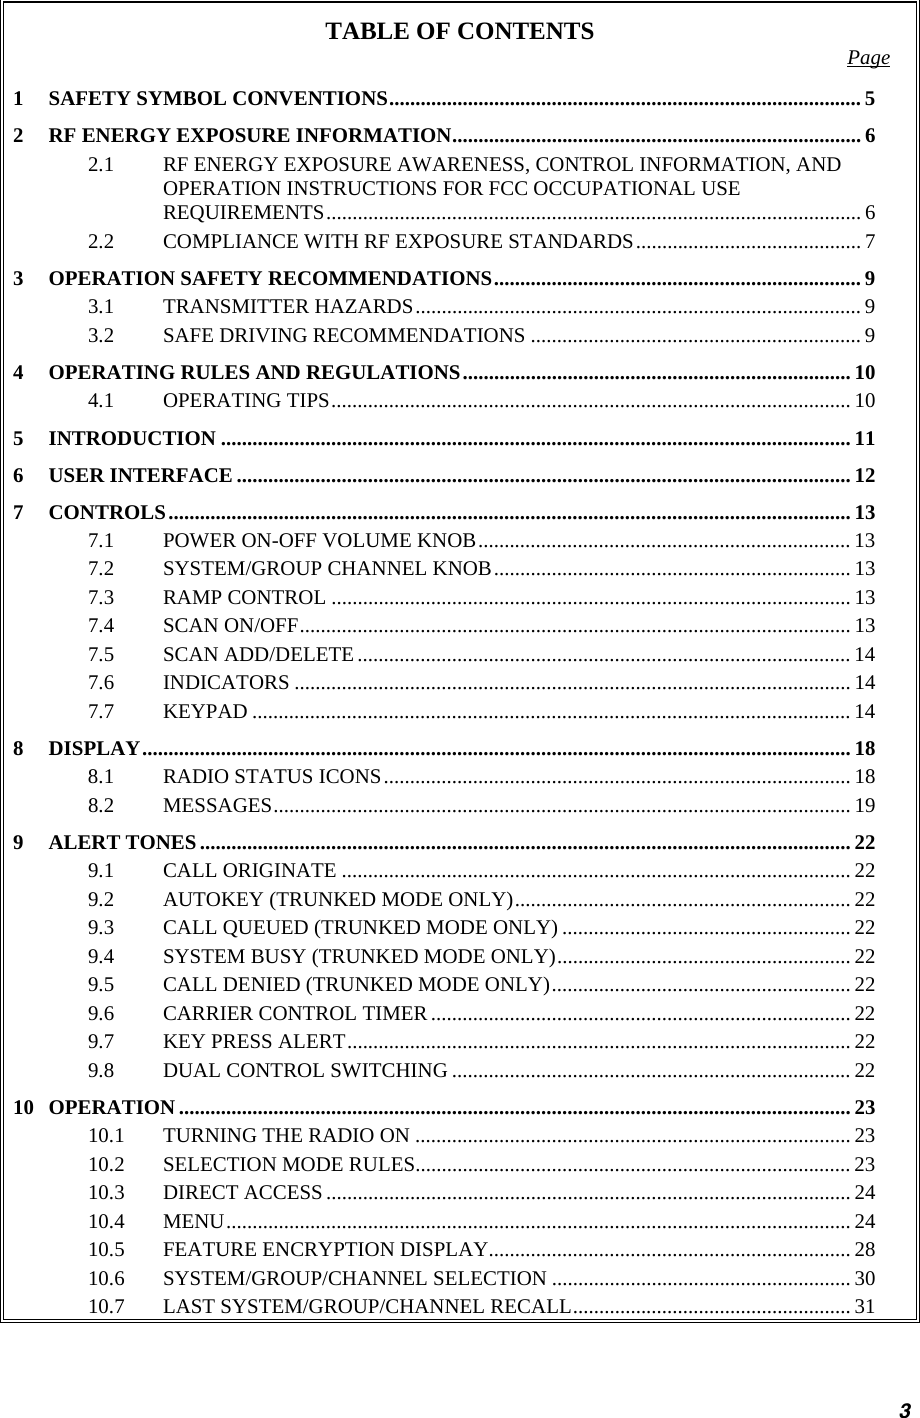 TABLE OF CONTENTS  Page 1 SAFETY SYMBOL CONVENTIONS.......................................................................................... 5 2 RF ENERGY EXPOSURE INFORMATION.............................................................................. 6 2.1 RF ENERGY EXPOSURE AWARENESS, CONTROL INFORMATION, AND OPERATION INSTRUCTIONS FOR FCC OCCUPATIONAL USE REQUIREMENTS...................................................................................................... 6 2.2 COMPLIANCE WITH RF EXPOSURE STANDARDS........................................... 7 3 OPERATION SAFETY RECOMMENDATIONS...................................................................... 9 3.1 TRANSMITTER HAZARDS..................................................................................... 9 3.2 SAFE DRIVING RECOMMENDATIONS ............................................................... 9 4 OPERATING RULES AND REGULATIONS.......................................................................... 10 4.1 OPERATING TIPS................................................................................................... 10 5 INTRODUCTION ........................................................................................................................ 11 6 USER INTERFACE ..................................................................................................................... 12 7 CONTROLS.................................................................................................................................. 13 7.1 POWER ON-OFF VOLUME KNOB....................................................................... 13 7.2 SYSTEM/GROUP CHANNEL KNOB.................................................................... 13 7.3 RAMP CONTROL ................................................................................................... 13 7.4 SCAN ON/OFF......................................................................................................... 13 7.5 SCAN ADD/DELETE..............................................................................................14 7.6 INDICATORS .......................................................................................................... 14 7.7 KEYPAD .................................................................................................................. 14 8 DISPLAY....................................................................................................................................... 18 8.1 RADIO STATUS ICONS......................................................................................... 18 8.2 MESSAGES.............................................................................................................. 19 9 ALERT TONES............................................................................................................................ 22 9.1 CALL ORIGINATE .................................................................................................22 9.2 AUTOKEY (TRUNKED MODE ONLY)................................................................ 22 9.3 CALL QUEUED (TRUNKED MODE ONLY) ....................................................... 22 9.4 SYSTEM BUSY (TRUNKED MODE ONLY)........................................................ 22 9.5 CALL DENIED (TRUNKED MODE ONLY)......................................................... 22 9.6 CARRIER CONTROL TIMER ................................................................................ 22 9.7 KEY PRESS ALERT................................................................................................ 22 9.8 DUAL CONTROL SWITCHING ............................................................................ 22 10 OPERATION ................................................................................................................................ 23 10.1 TURNING THE RADIO ON ................................................................................... 23 10.2 SELECTION MODE RULES................................................................................... 23 10.3 DIRECT ACCESS....................................................................................................24 10.4 MENU....................................................................................................................... 24 10.5 FEATURE ENCRYPTION DISPLAY..................................................................... 28 10.6 SYSTEM/GROUP/CHANNEL SELECTION ......................................................... 30 10.7 LAST SYSTEM/GROUP/CHANNEL RECALL..................................................... 31 3 